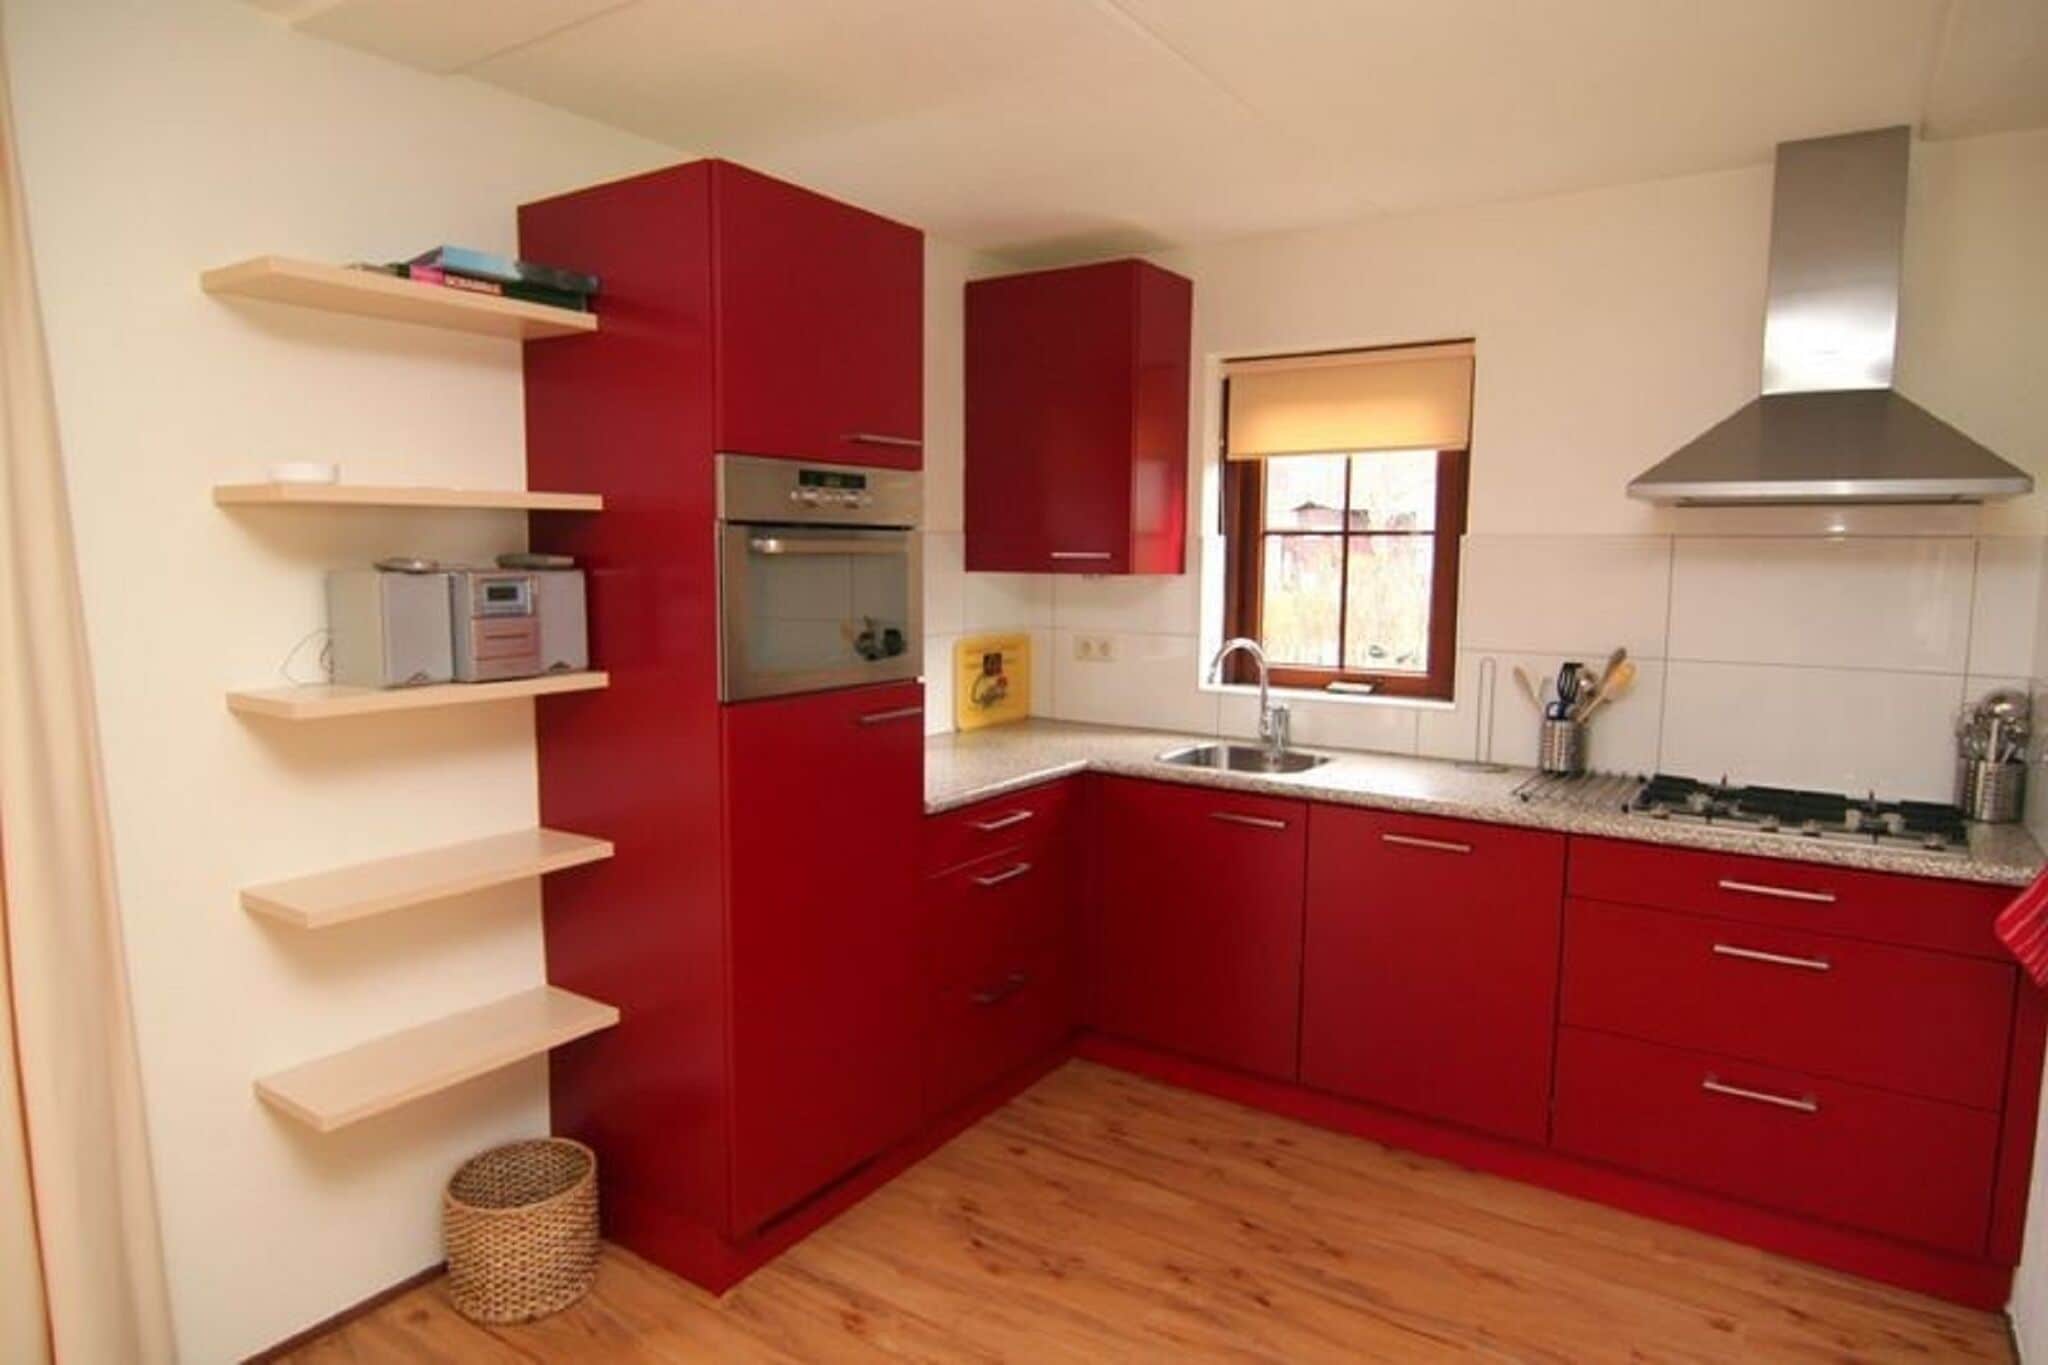 Spacious holiday home with dishwasher on Texel